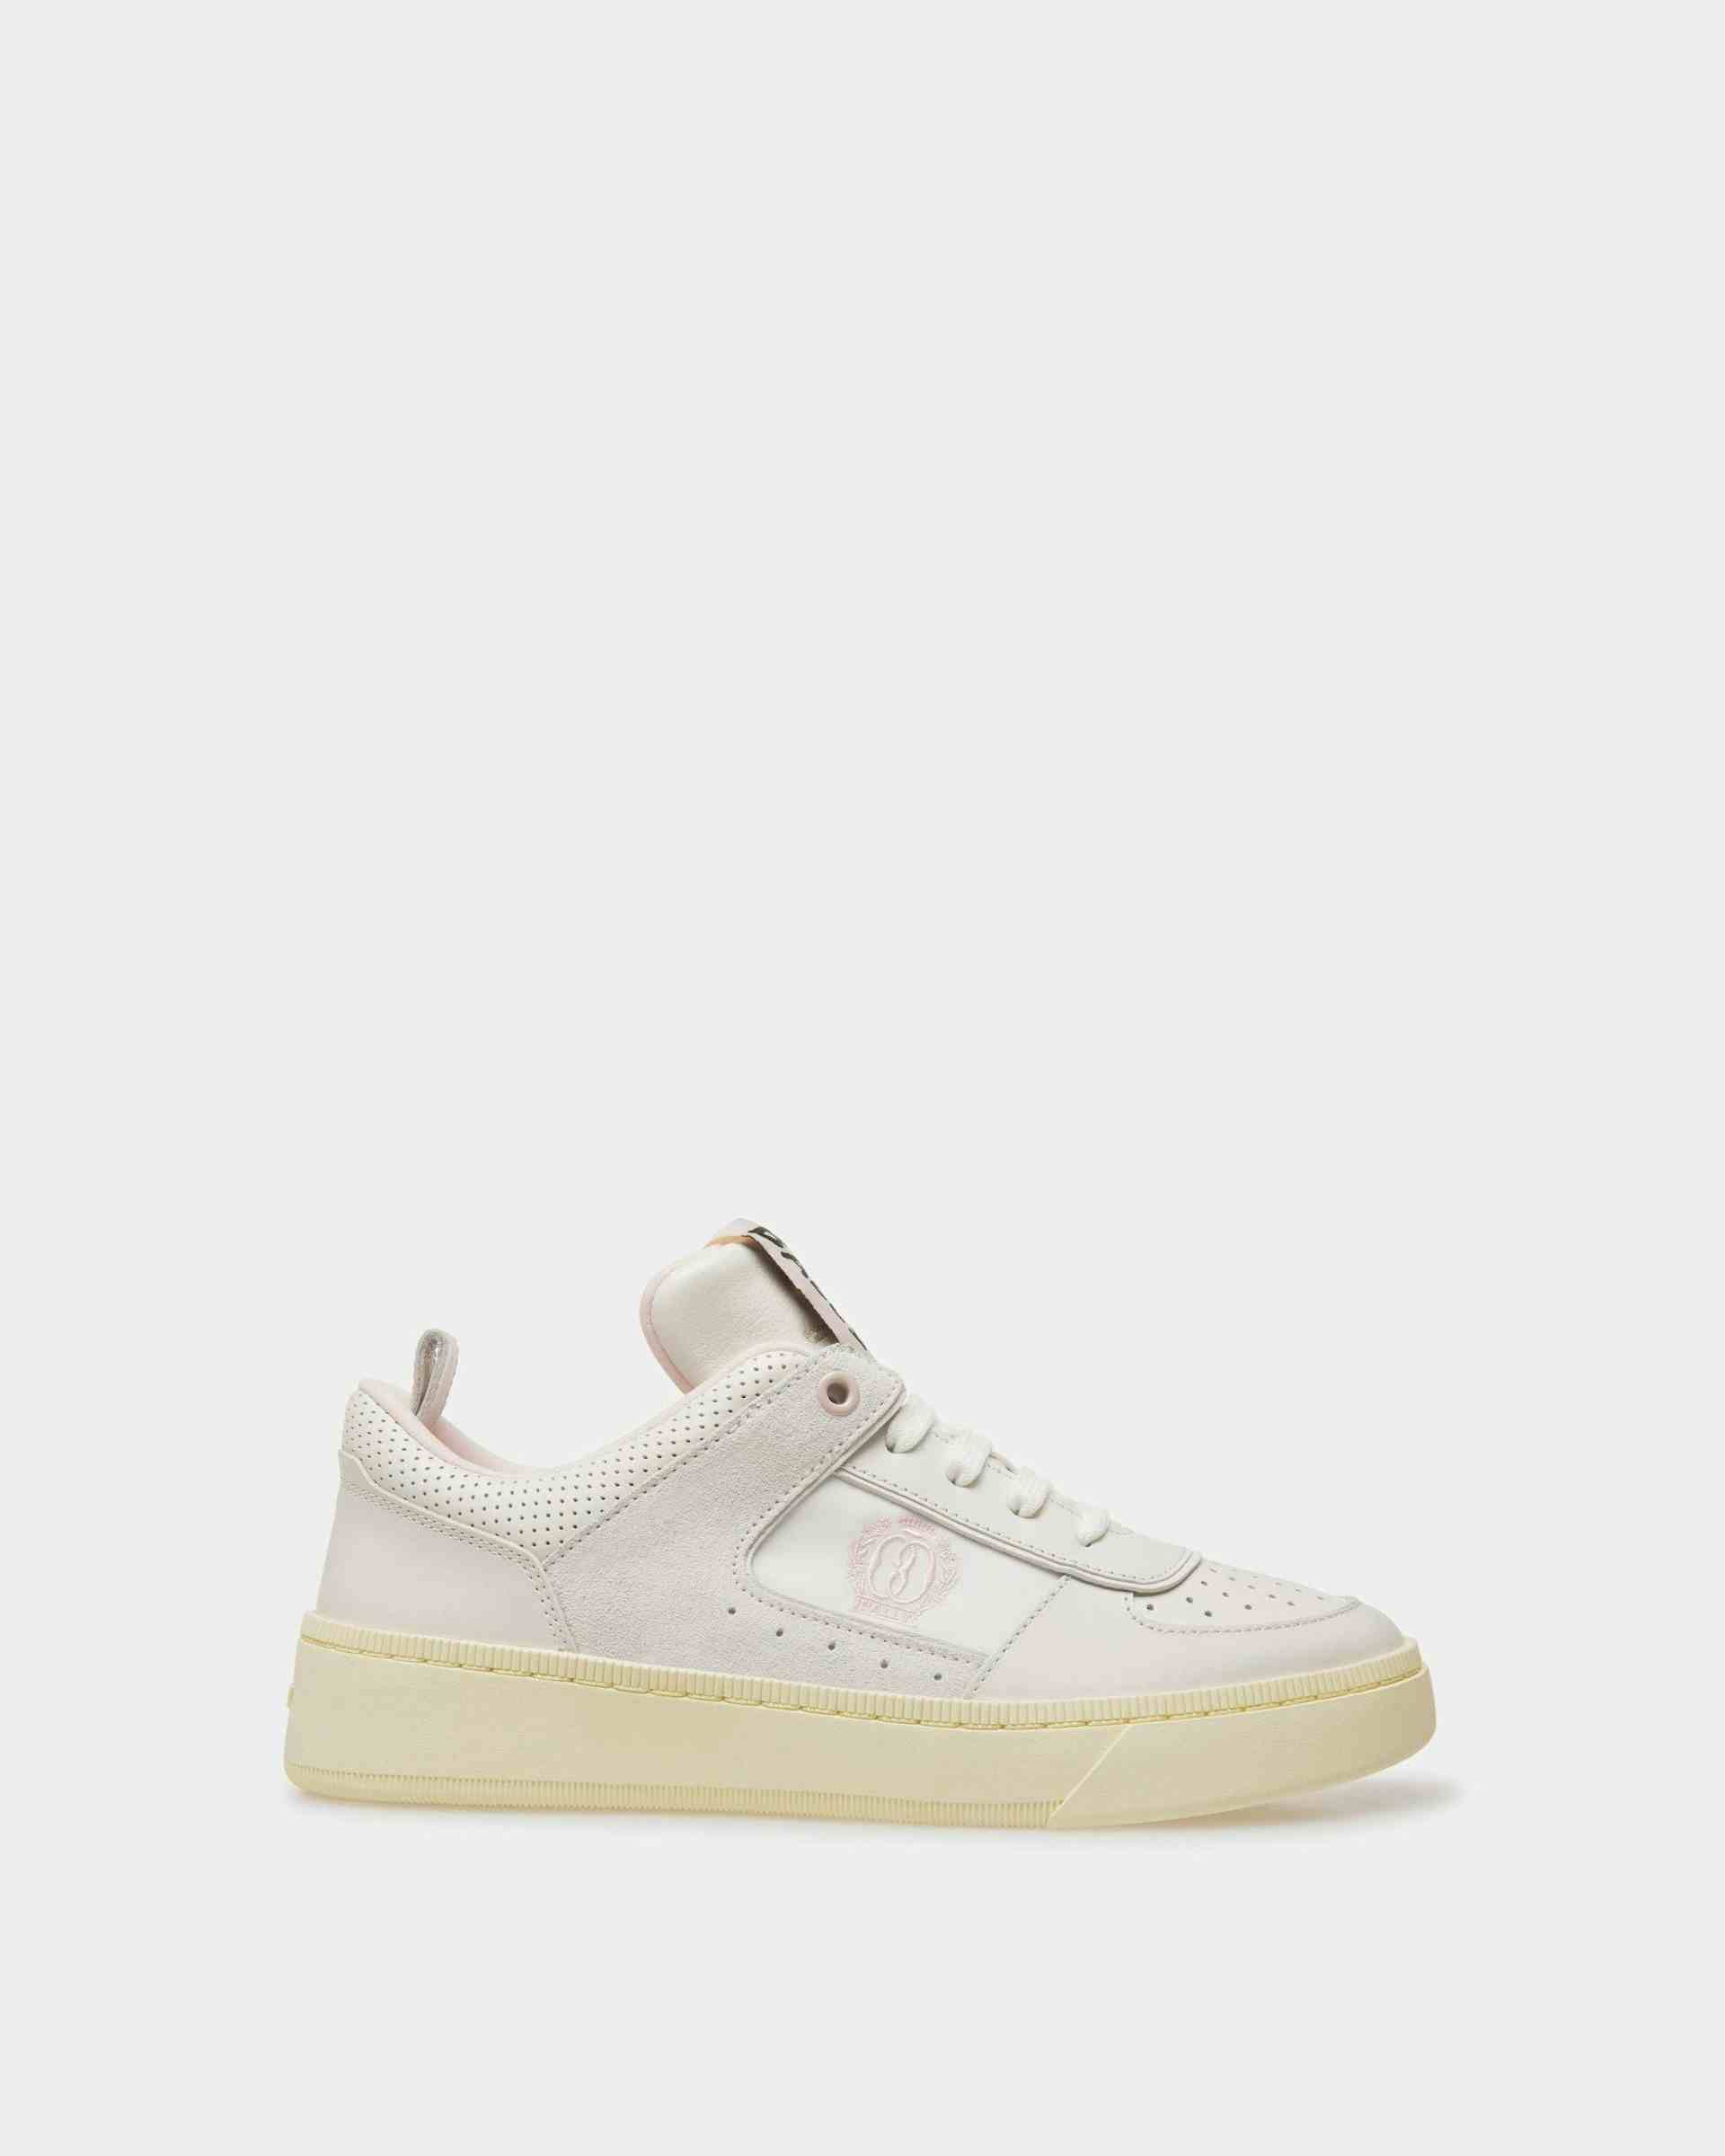 Raise Sneakers In White And Rosa Leather - Women's - Bally